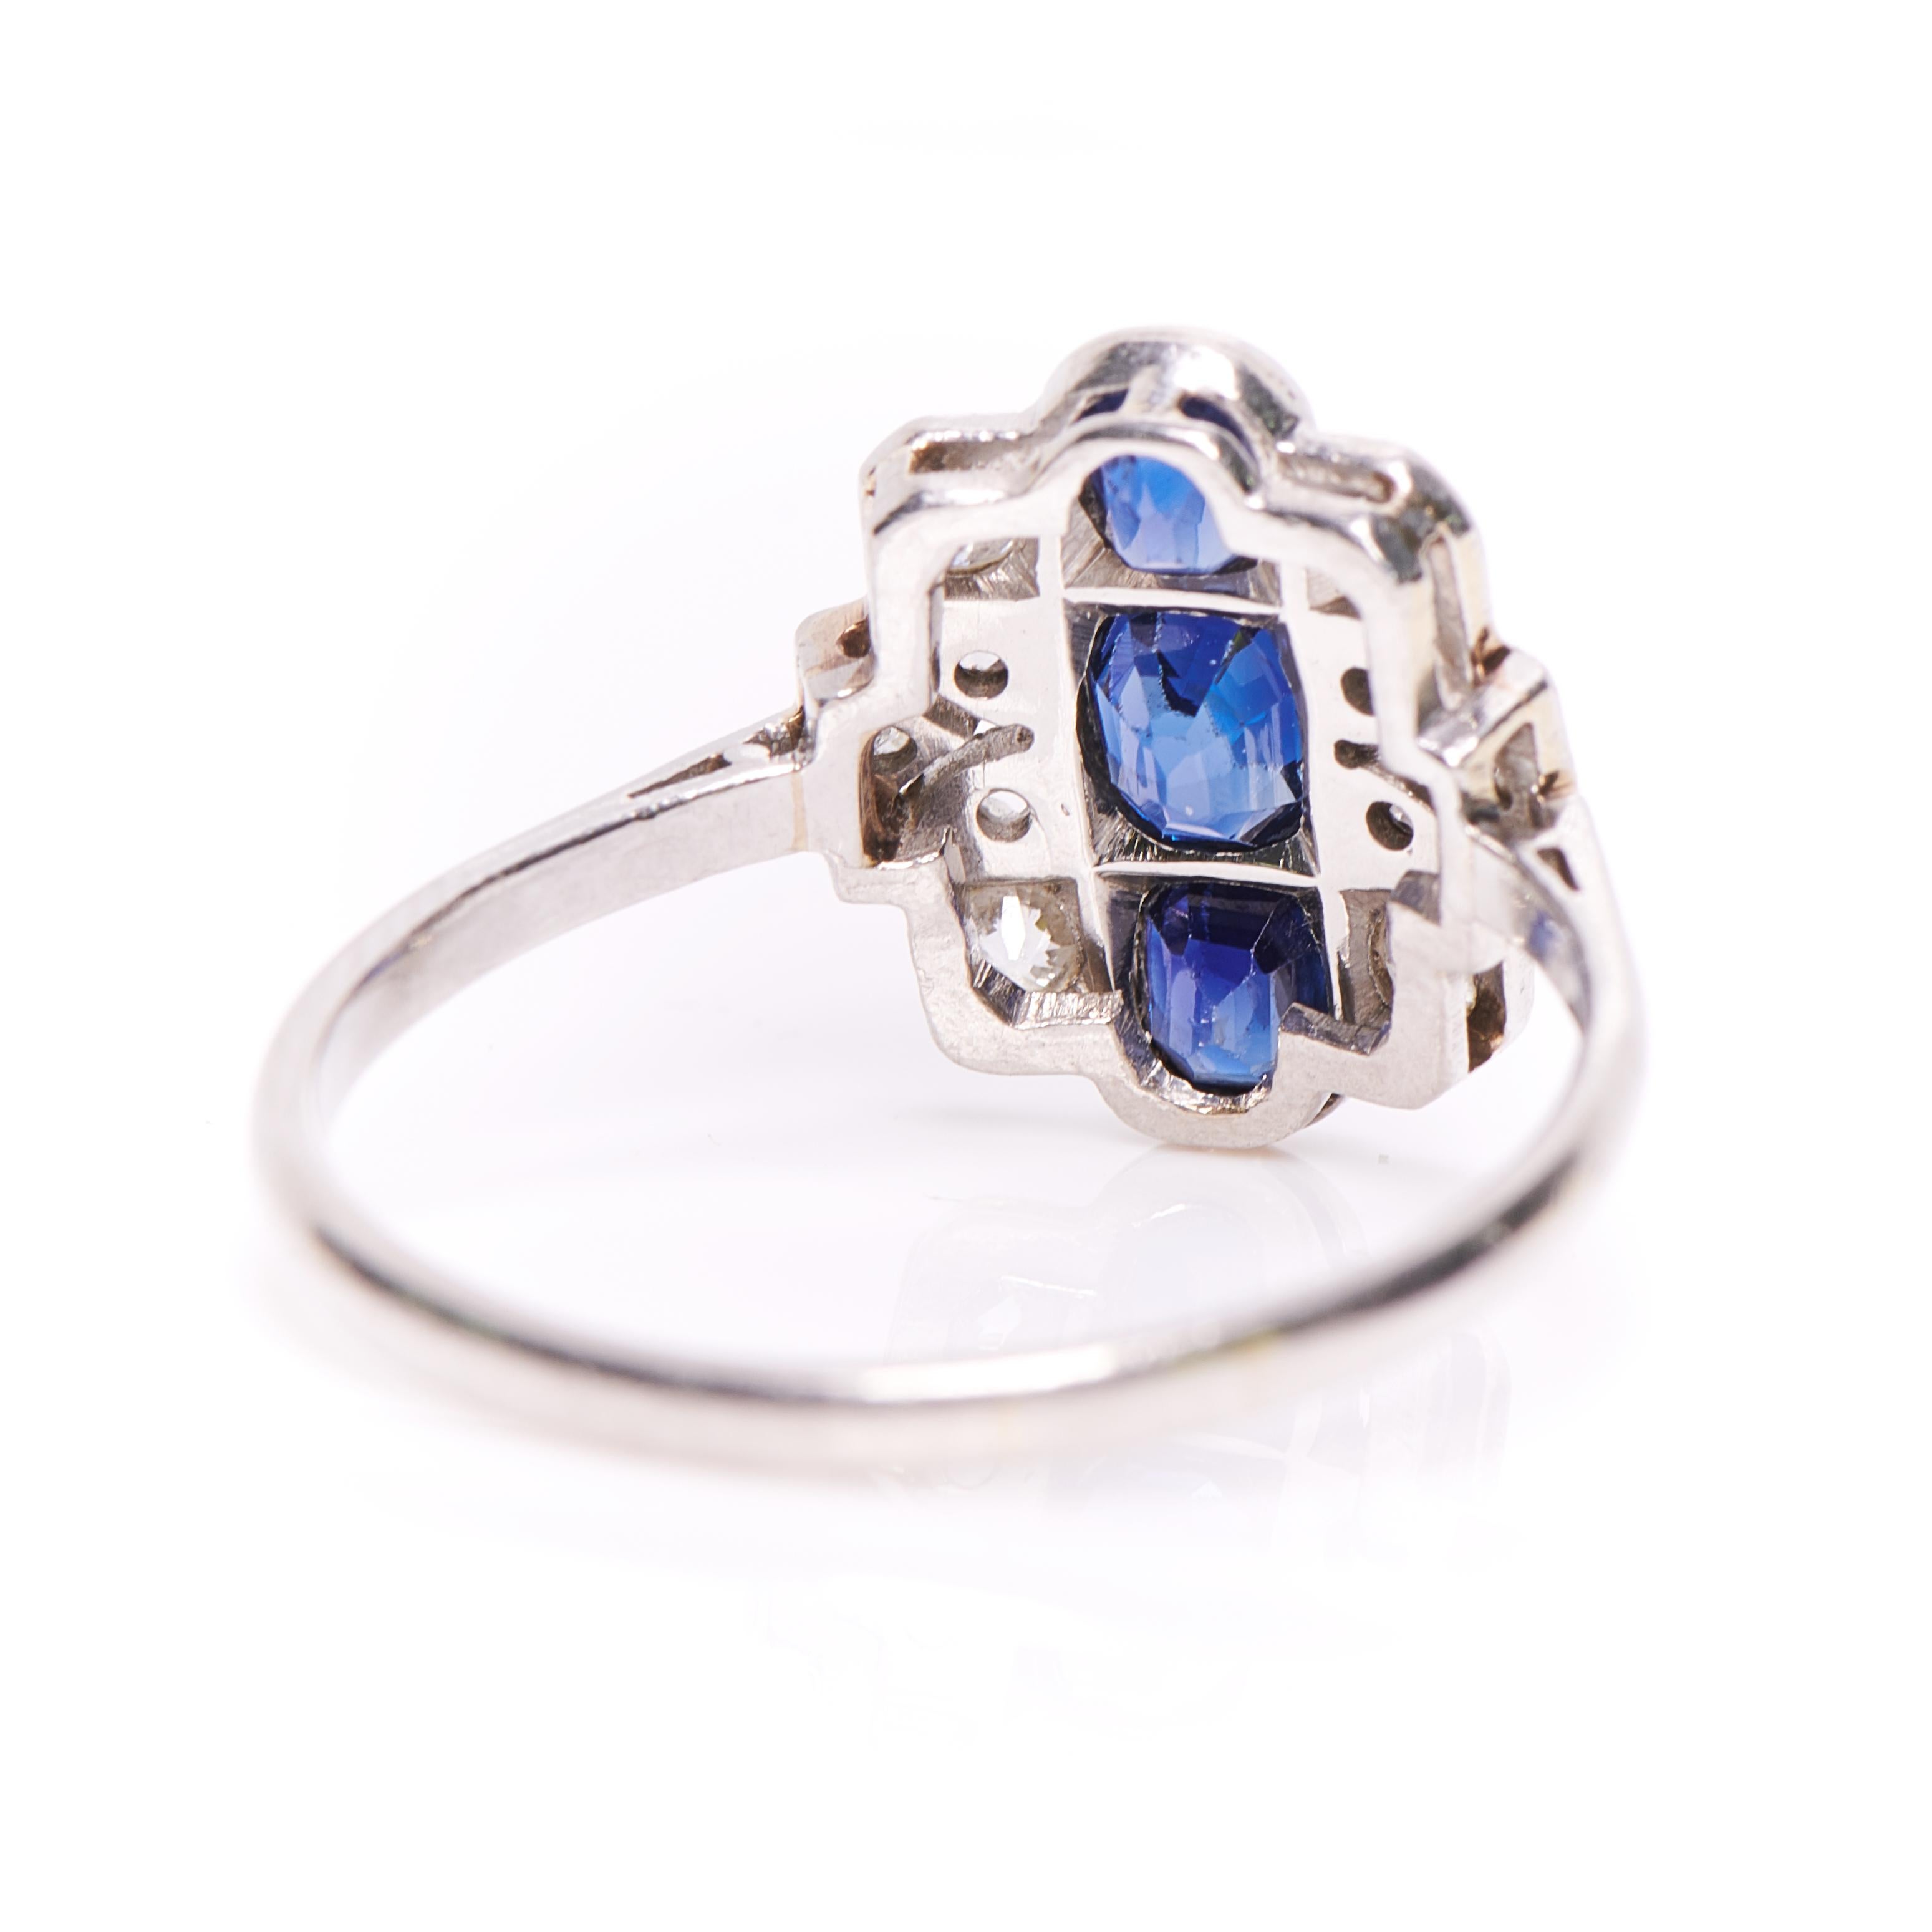 Art Deco sapphire and diamond ring, circa 1925. Set with three oval-cut sapphires of exceptional blue colour and clarity in rubover settings. Further set with old cut diamonds interspersed with a subtle but sinuous openwork design to form an